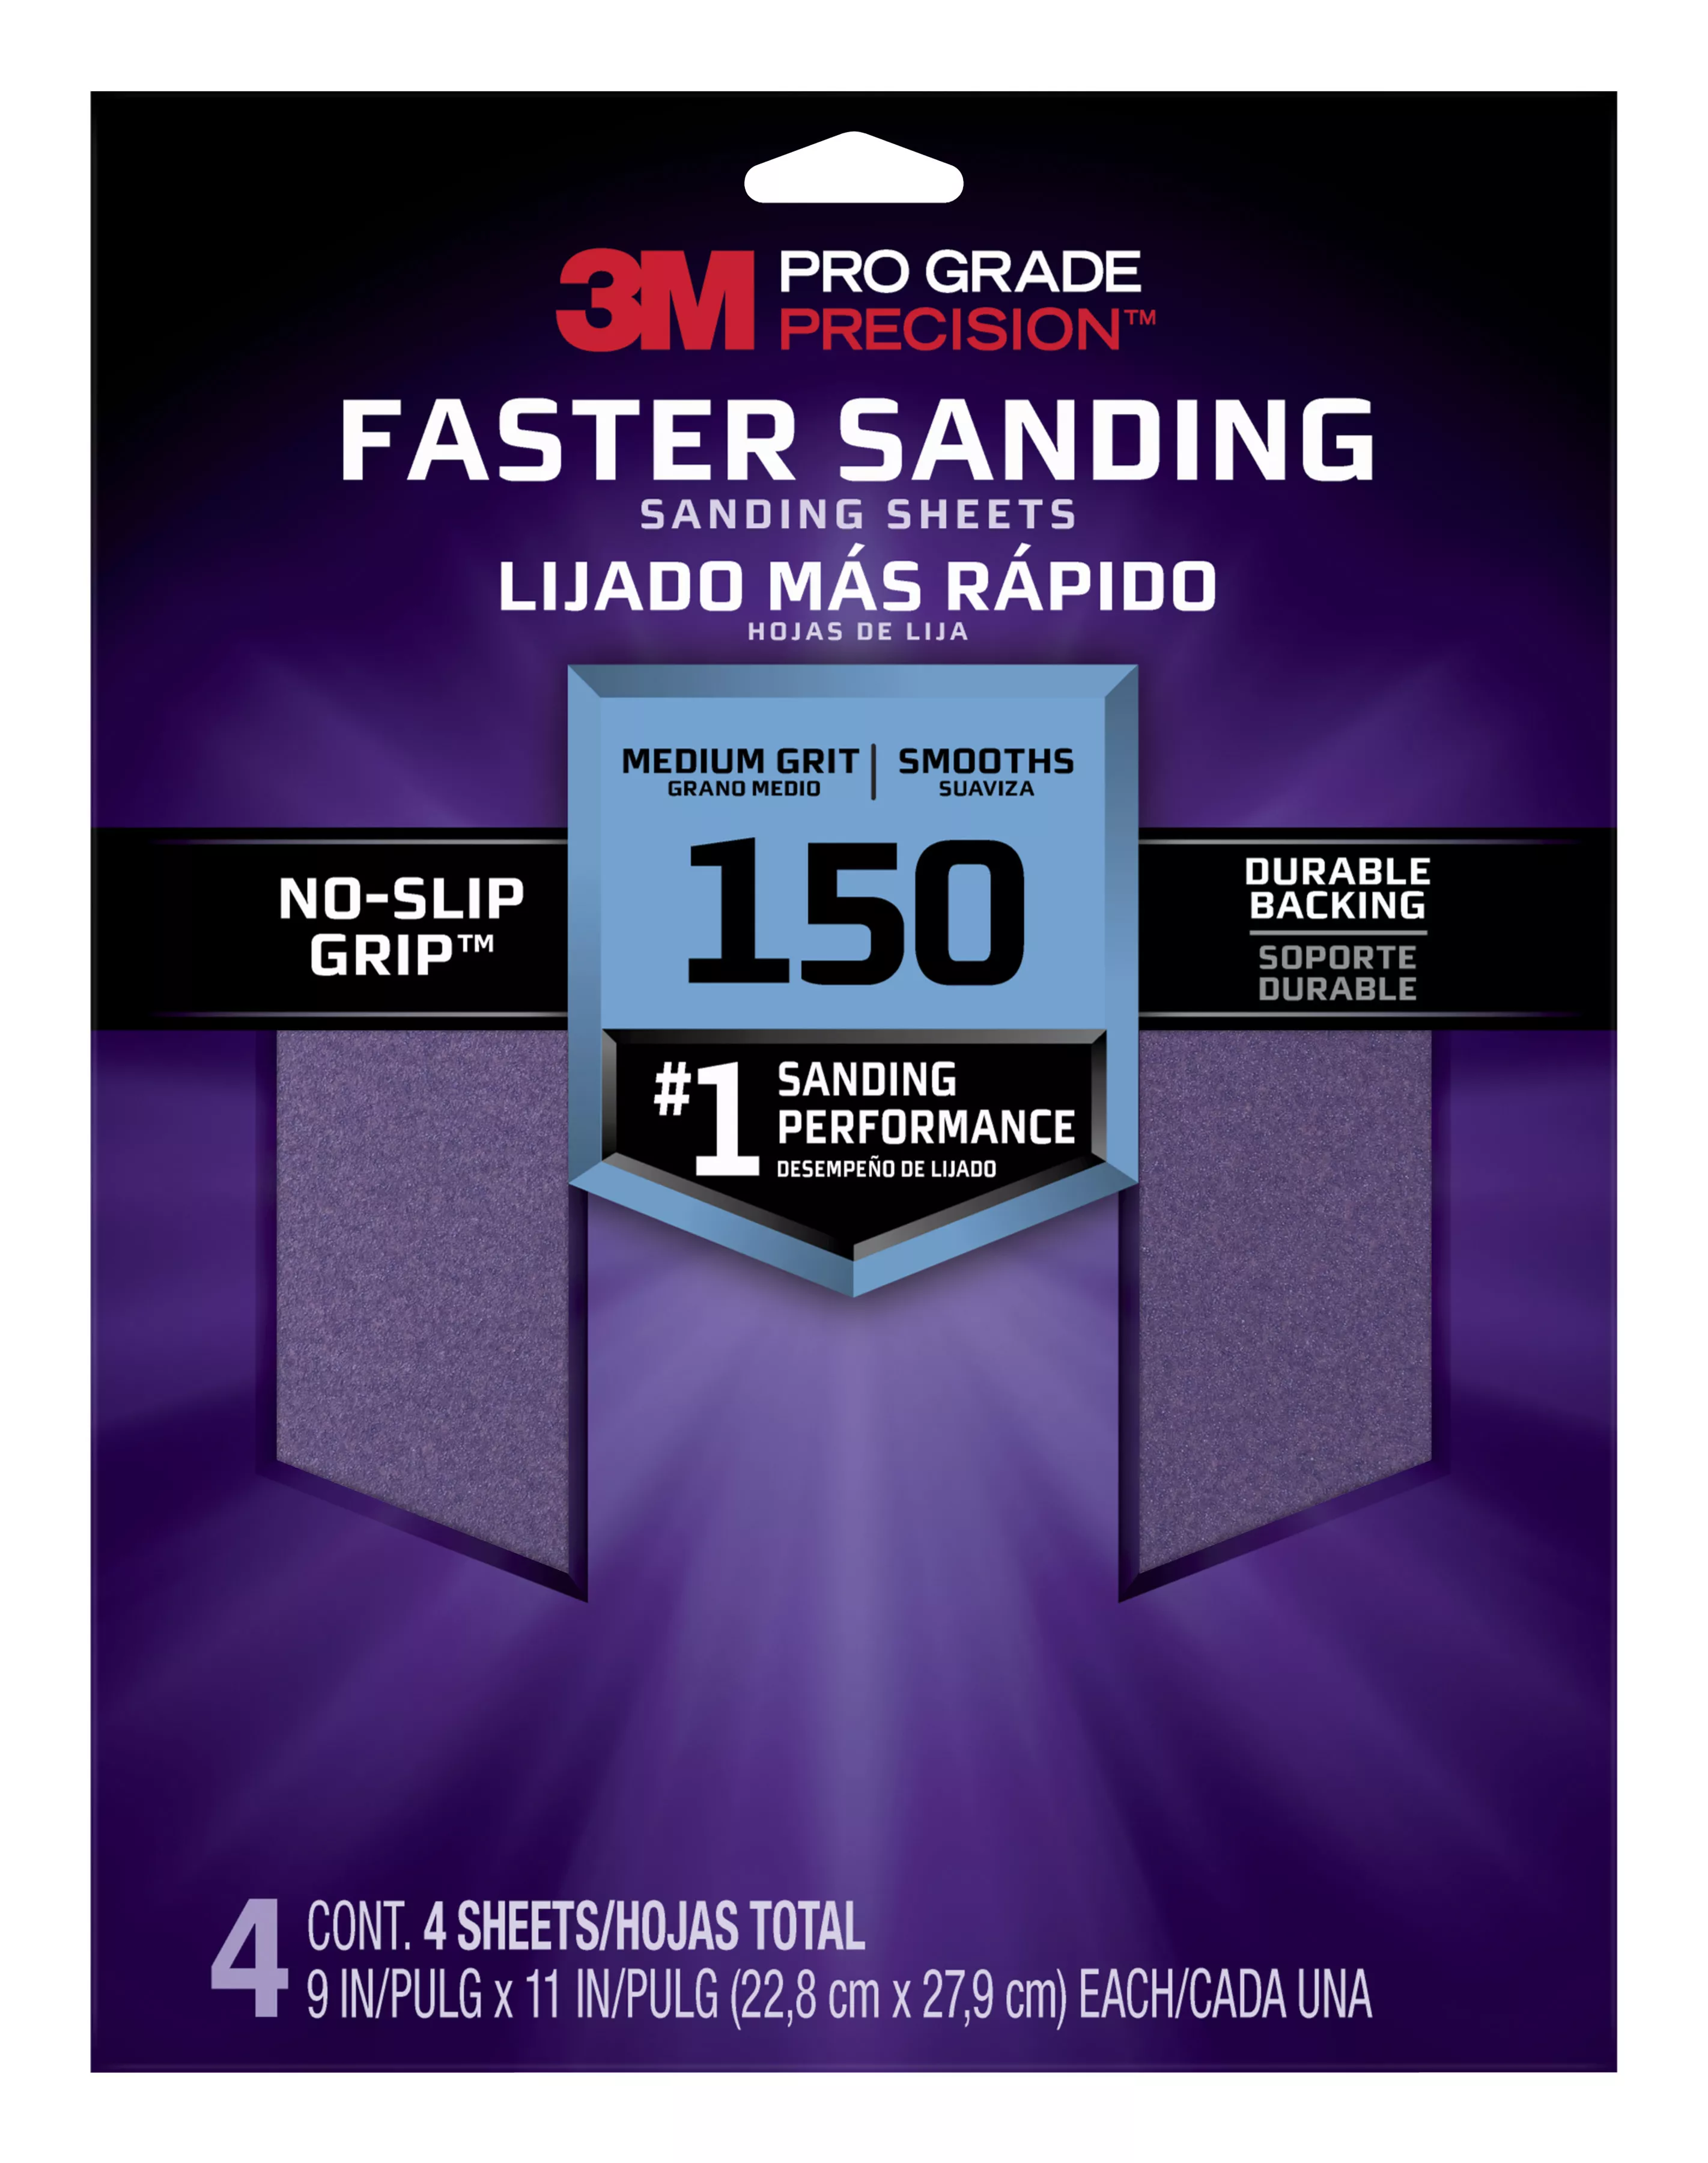 3M™ Pro Grade Precision™ Faster Sanding Sheets w/ NO-SLIP GRIP™ Backing SHR180-PGP-4T, 9 in x 11 in, 180 Gr, 4 Shts/pk